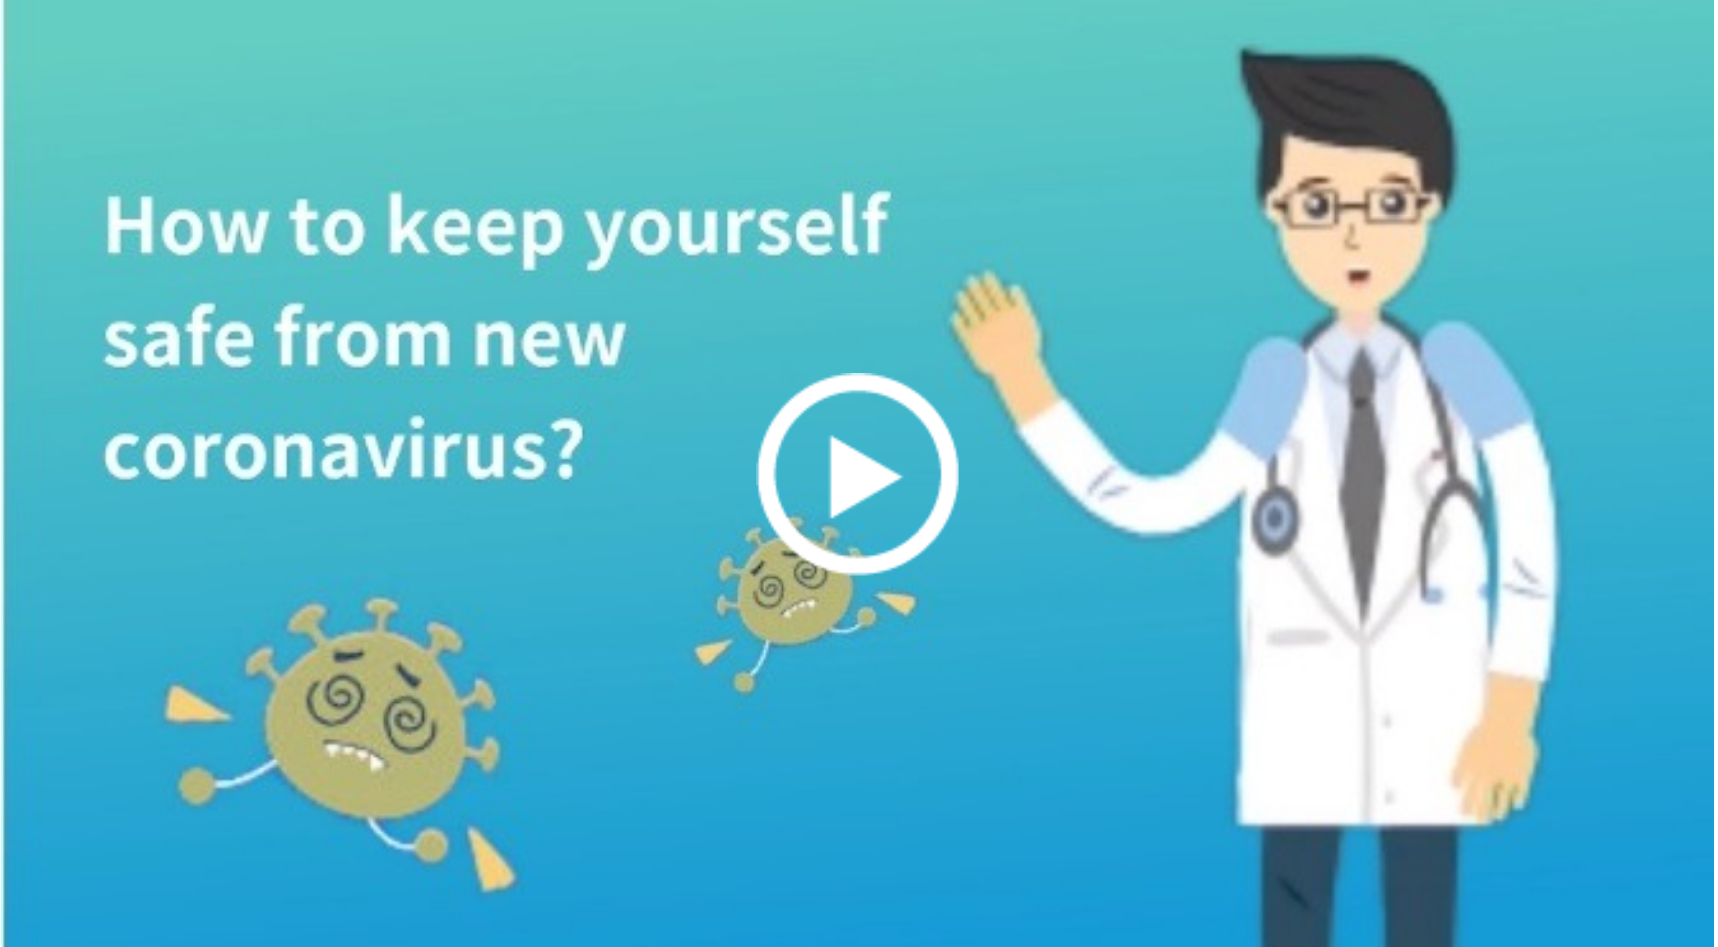 How to Keep Yourself Safe from New Coronavirus?